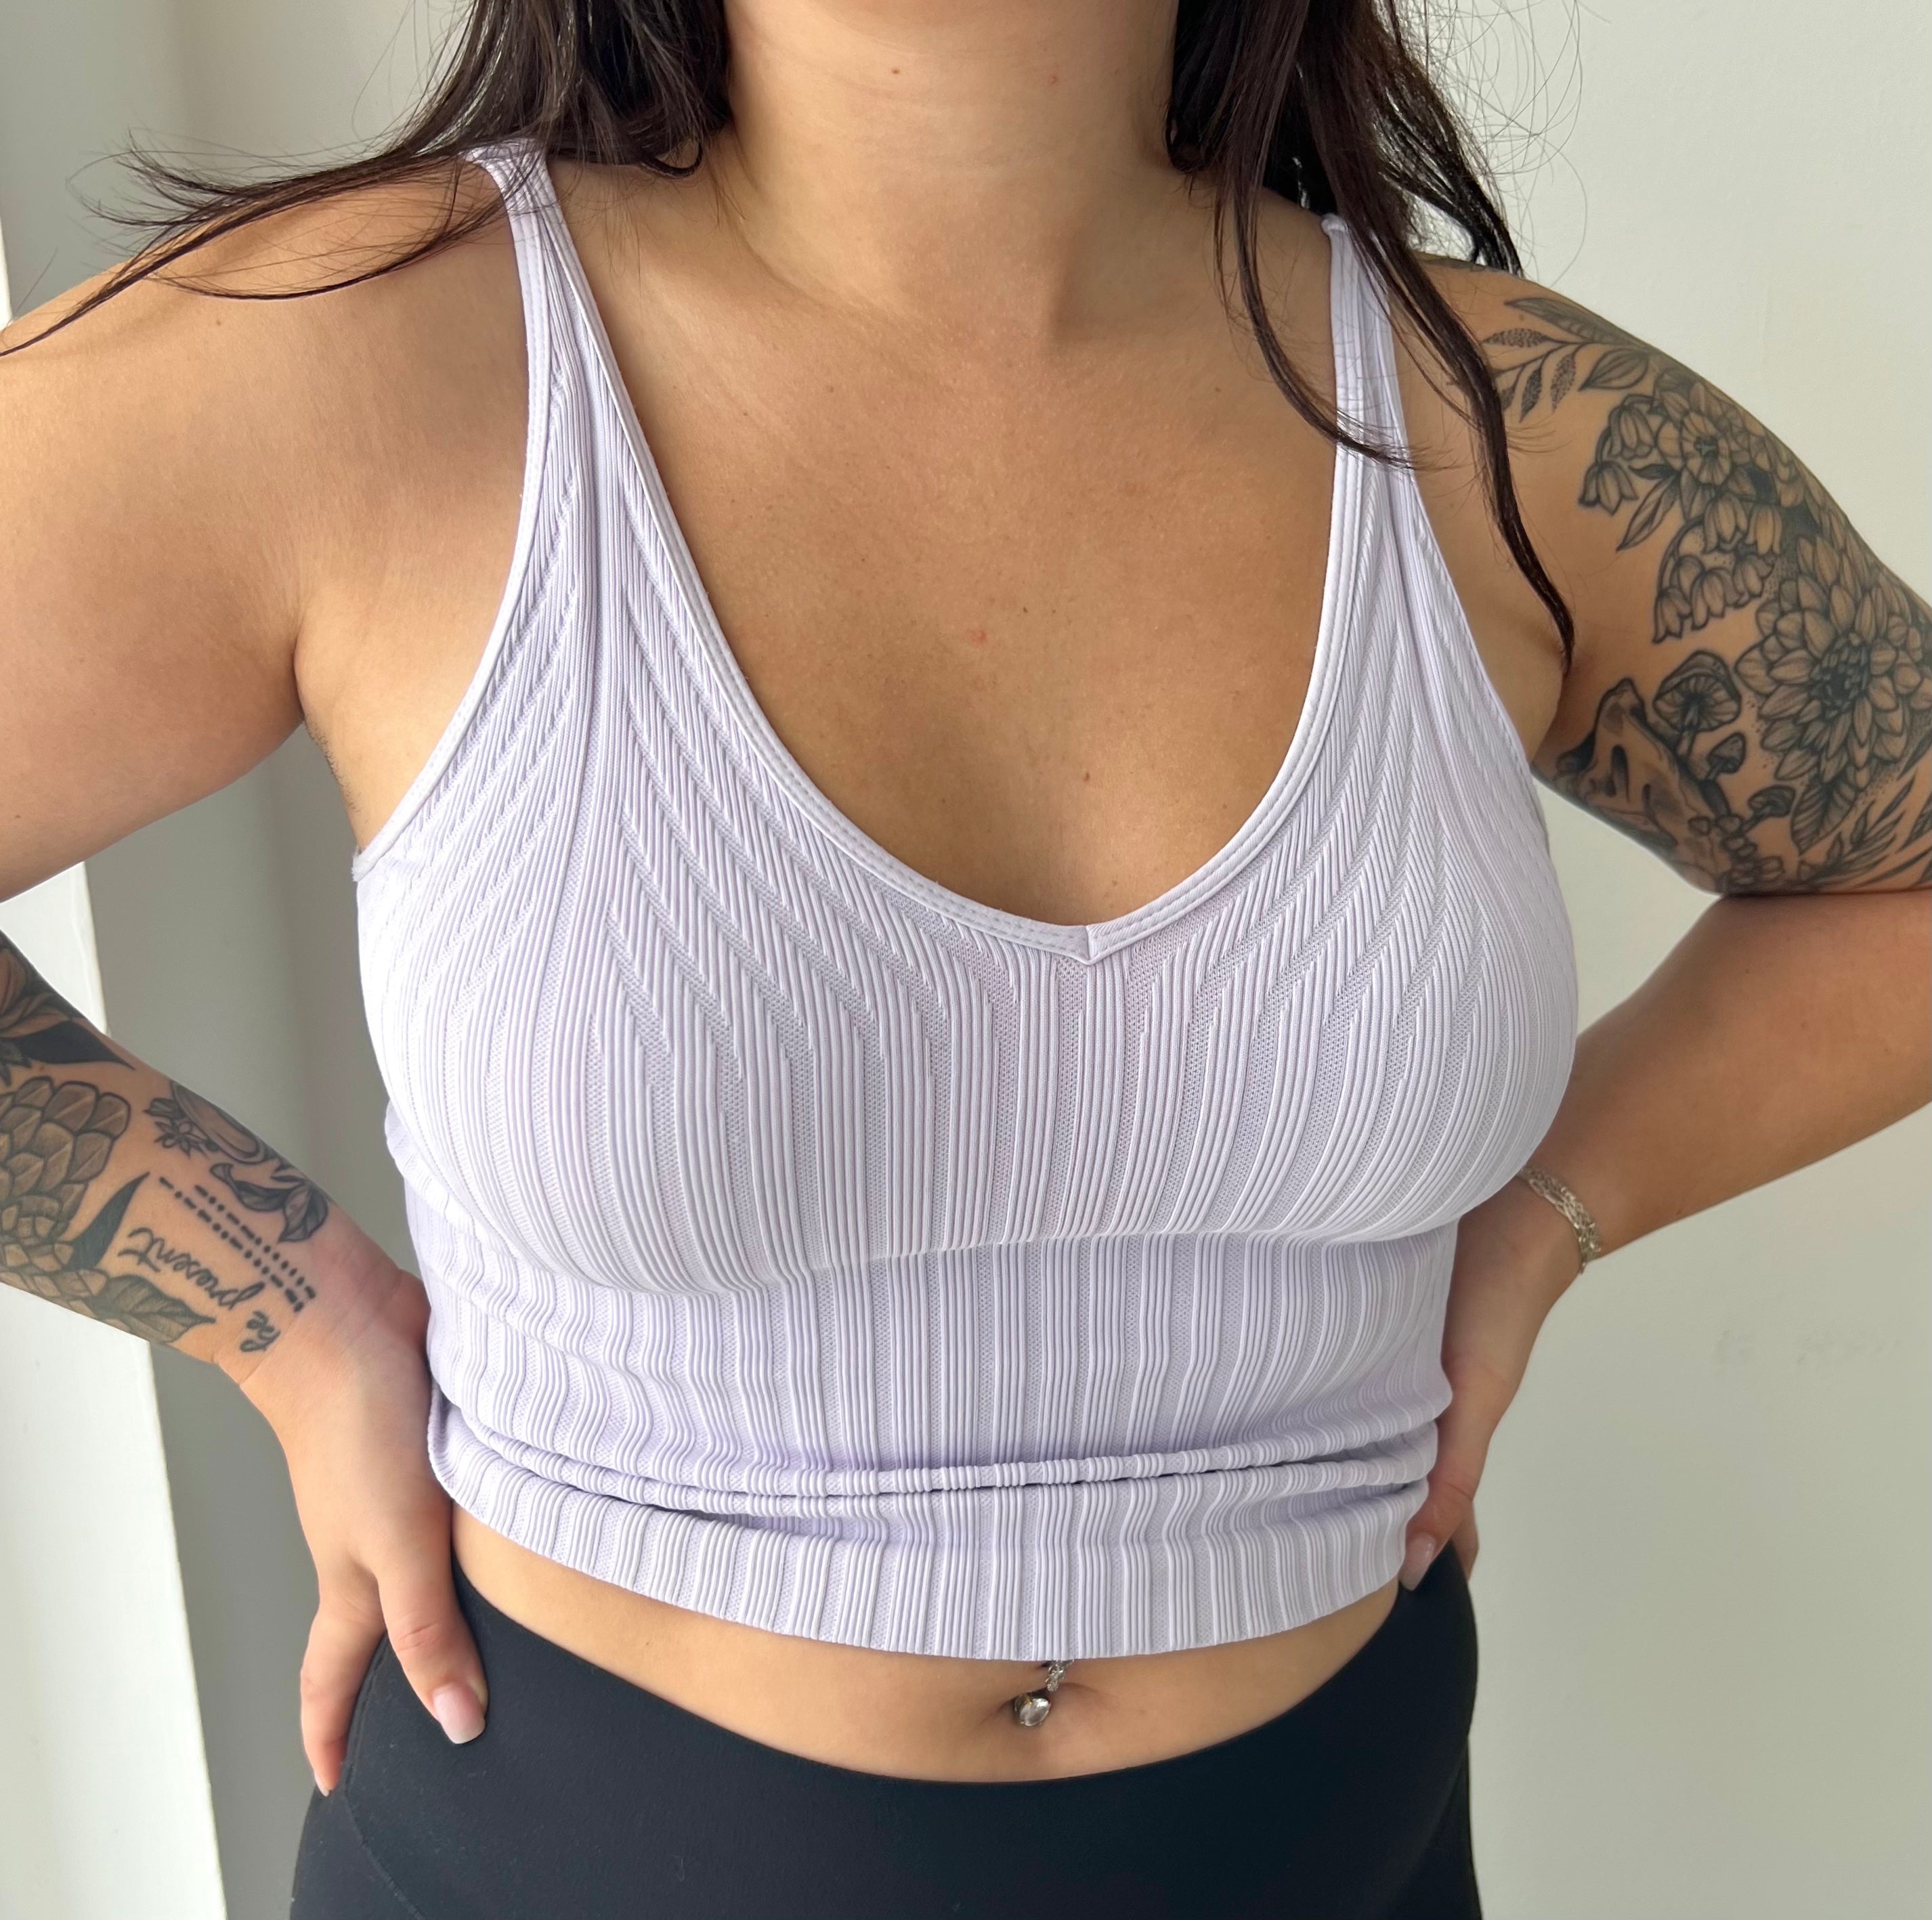 Seamless Collection – pacificnorthtess